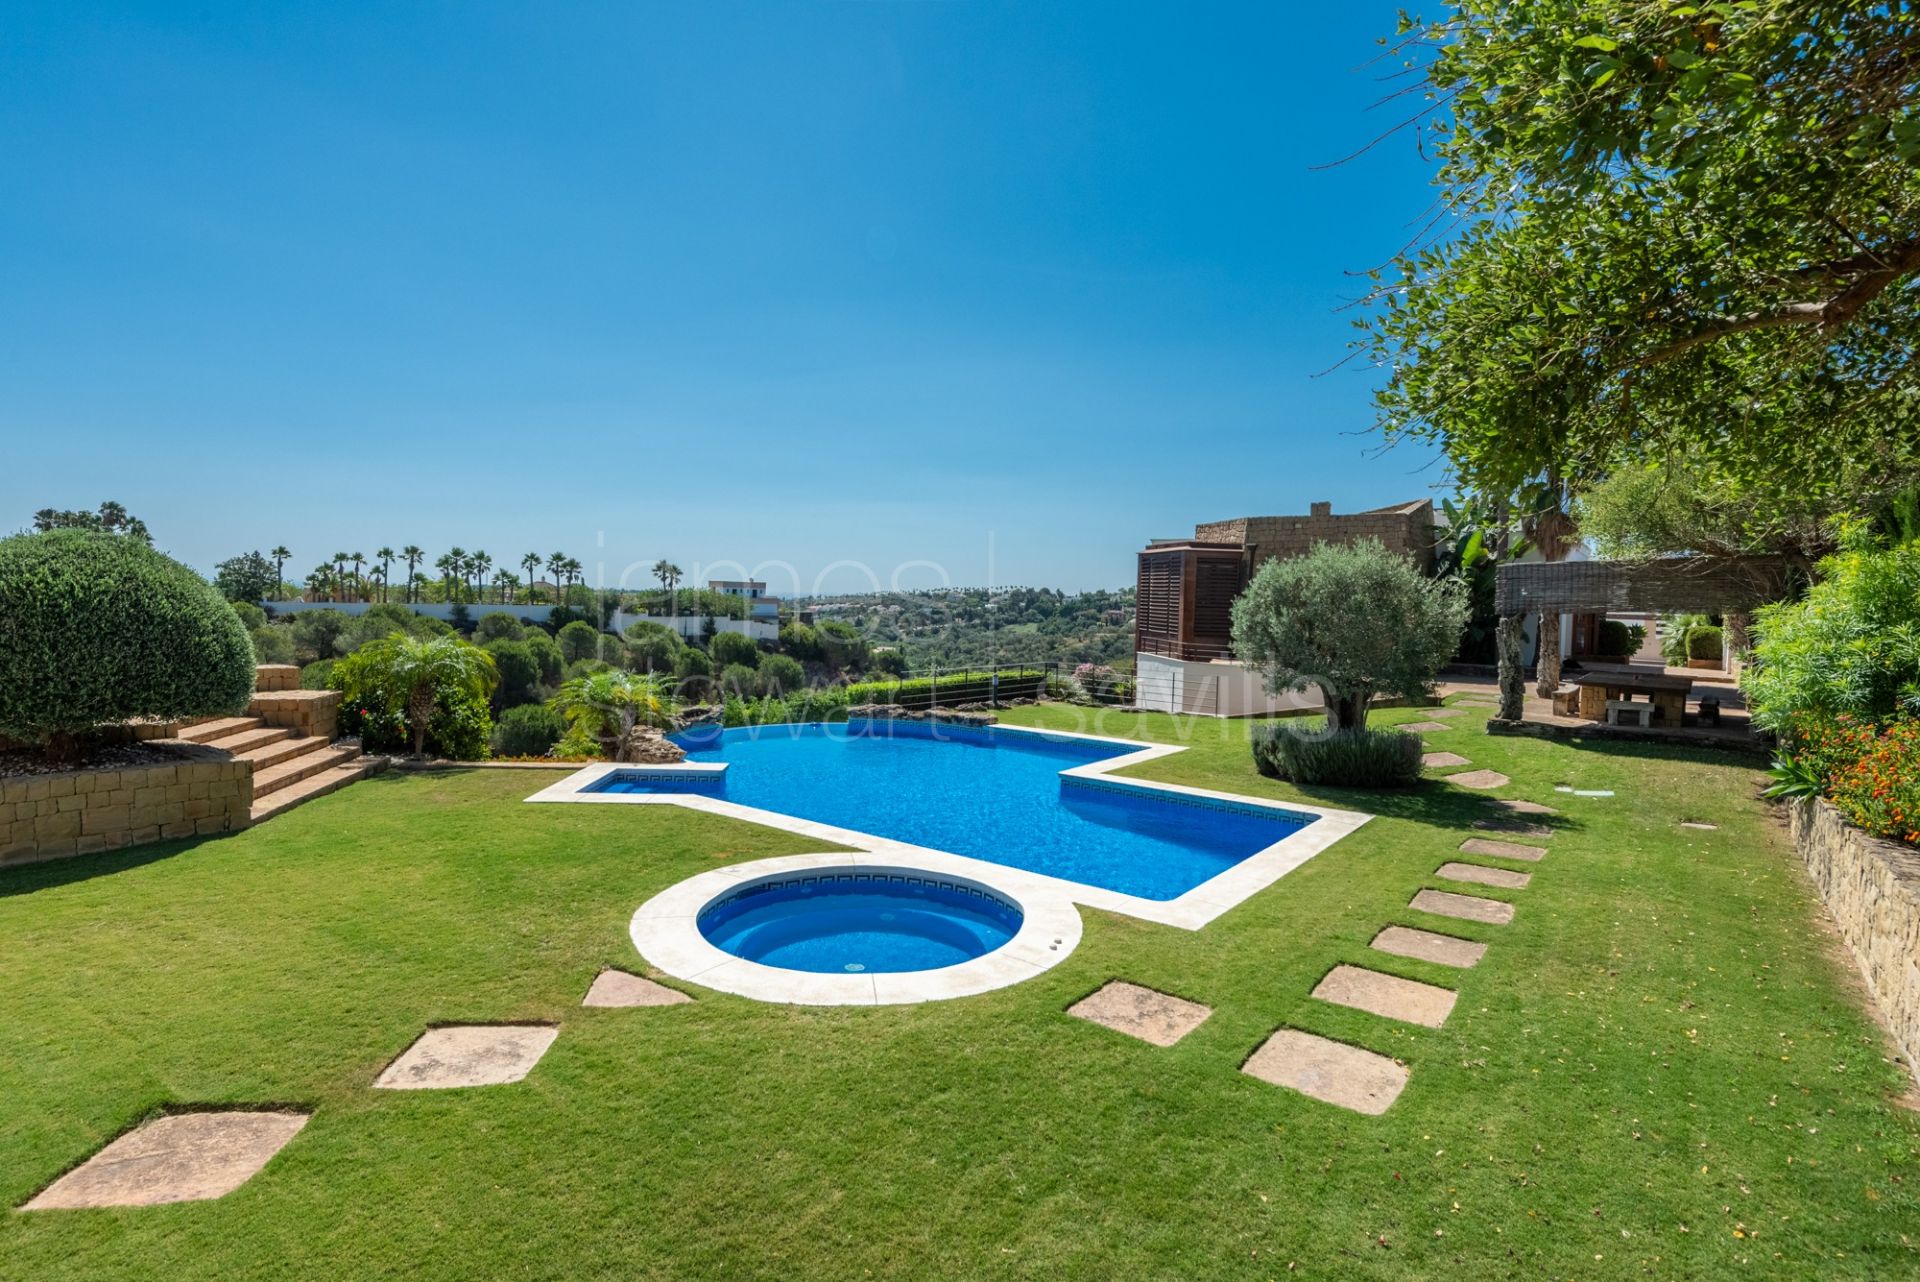 Unique opportunity to buy an excellent multi generational two home family compound in Sotogrande Alto